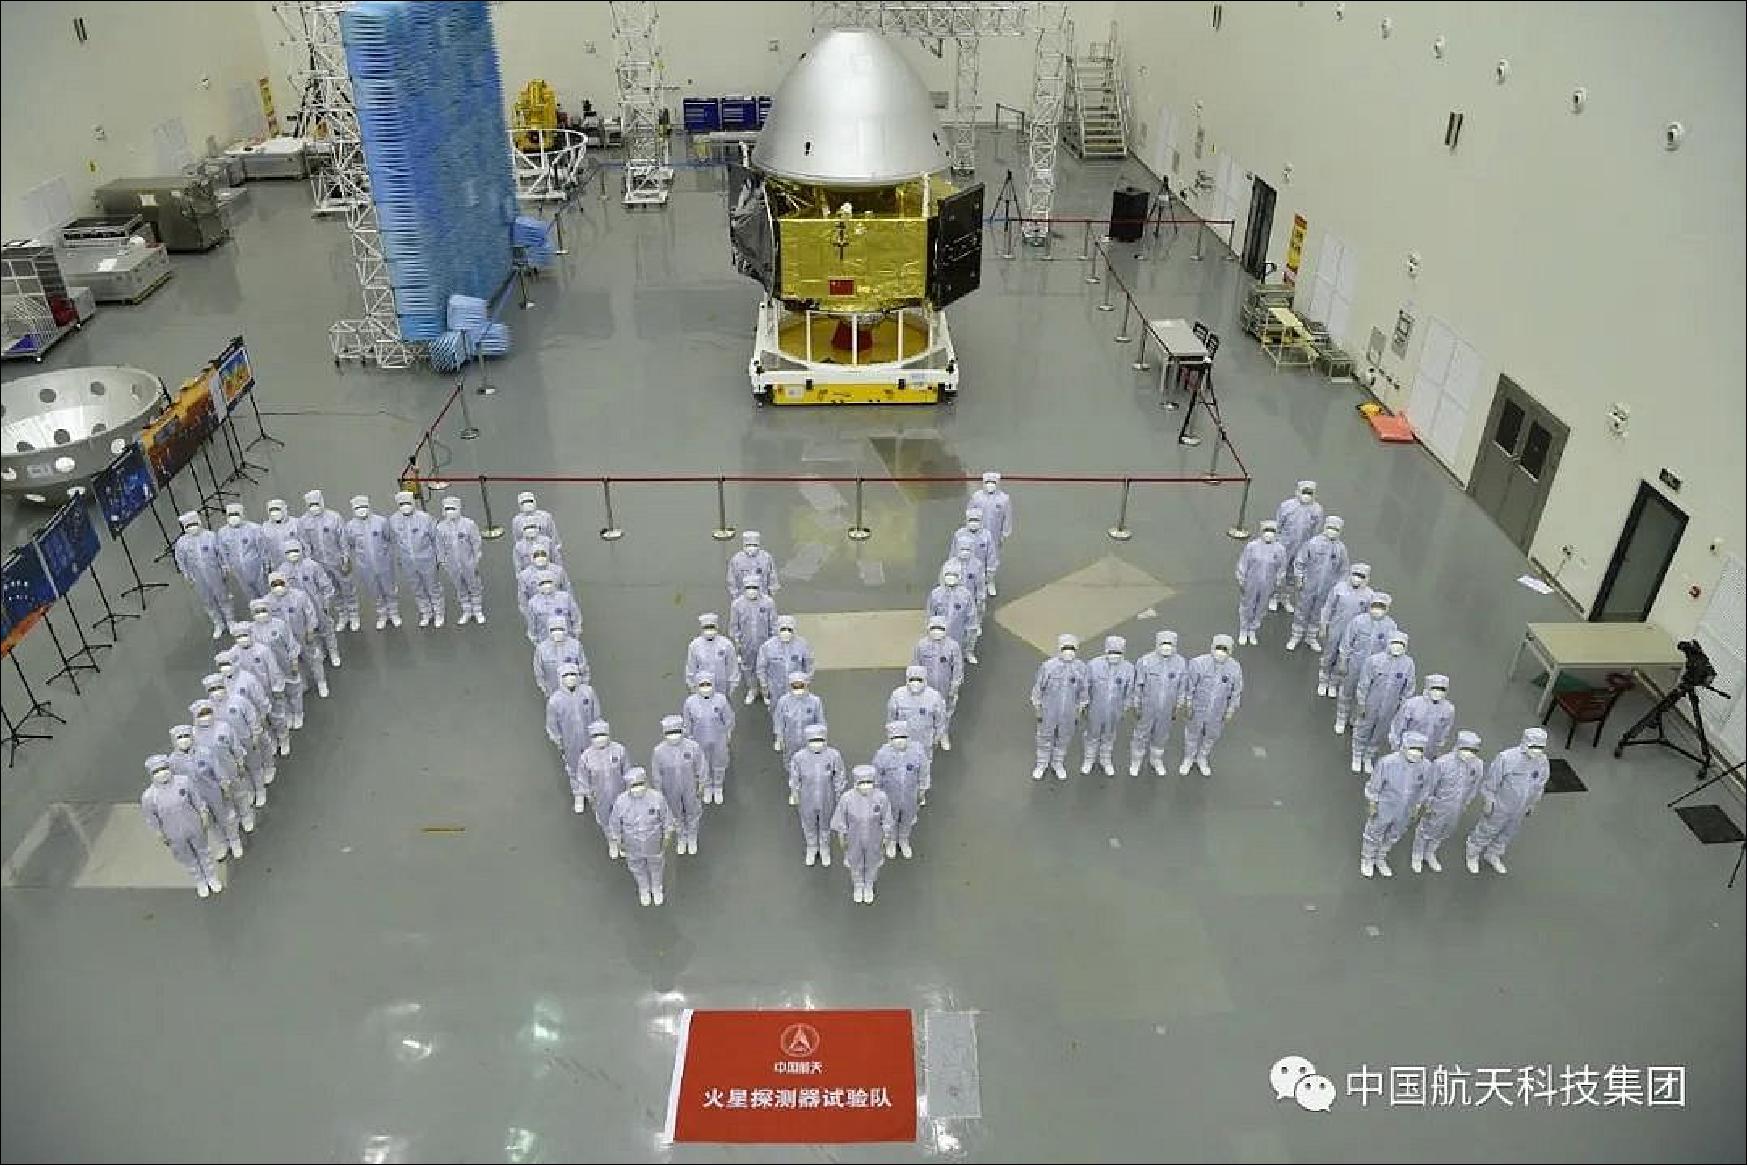 Figure 6: Ground teams pose with the Tianwen-1 spacecraft in its launch configuration, with the mission’s orbiter, lander and rover connected together (image credit: CASC, Ref. 12)